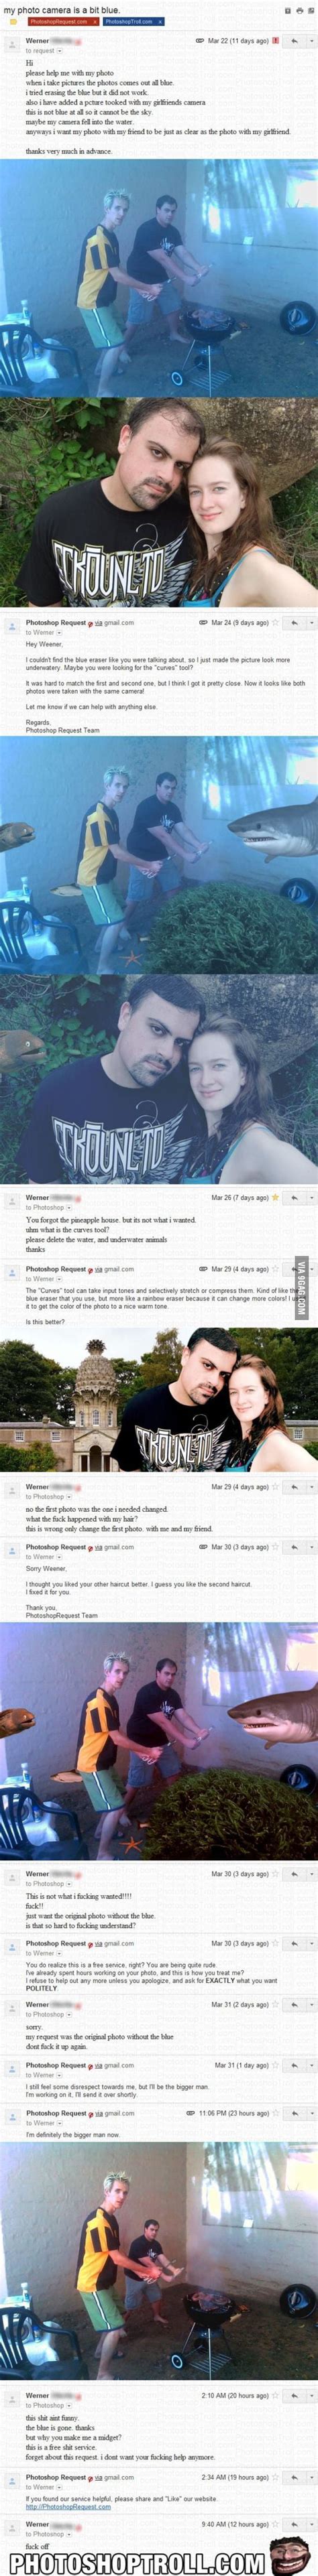 the ultimate photoshop trolling 9gag